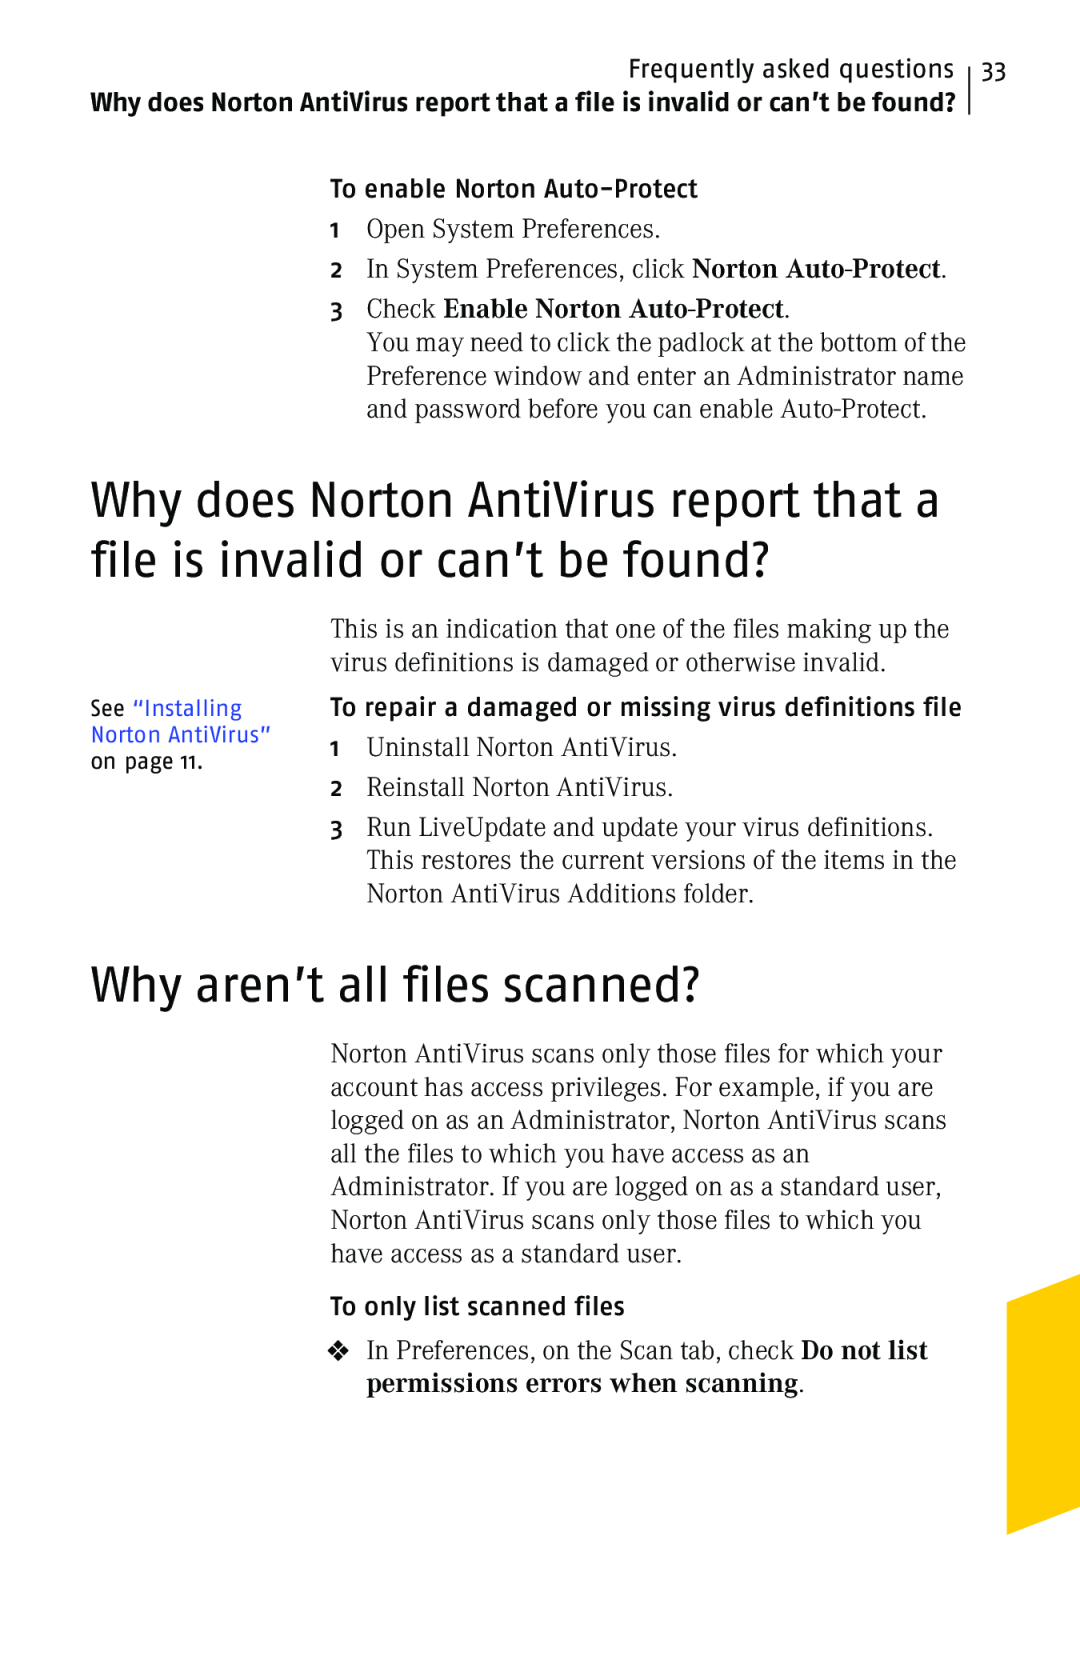 Symantec 10 manual Why aren’t all files scanned?, 3Check Enable Norton Auto-Protect 